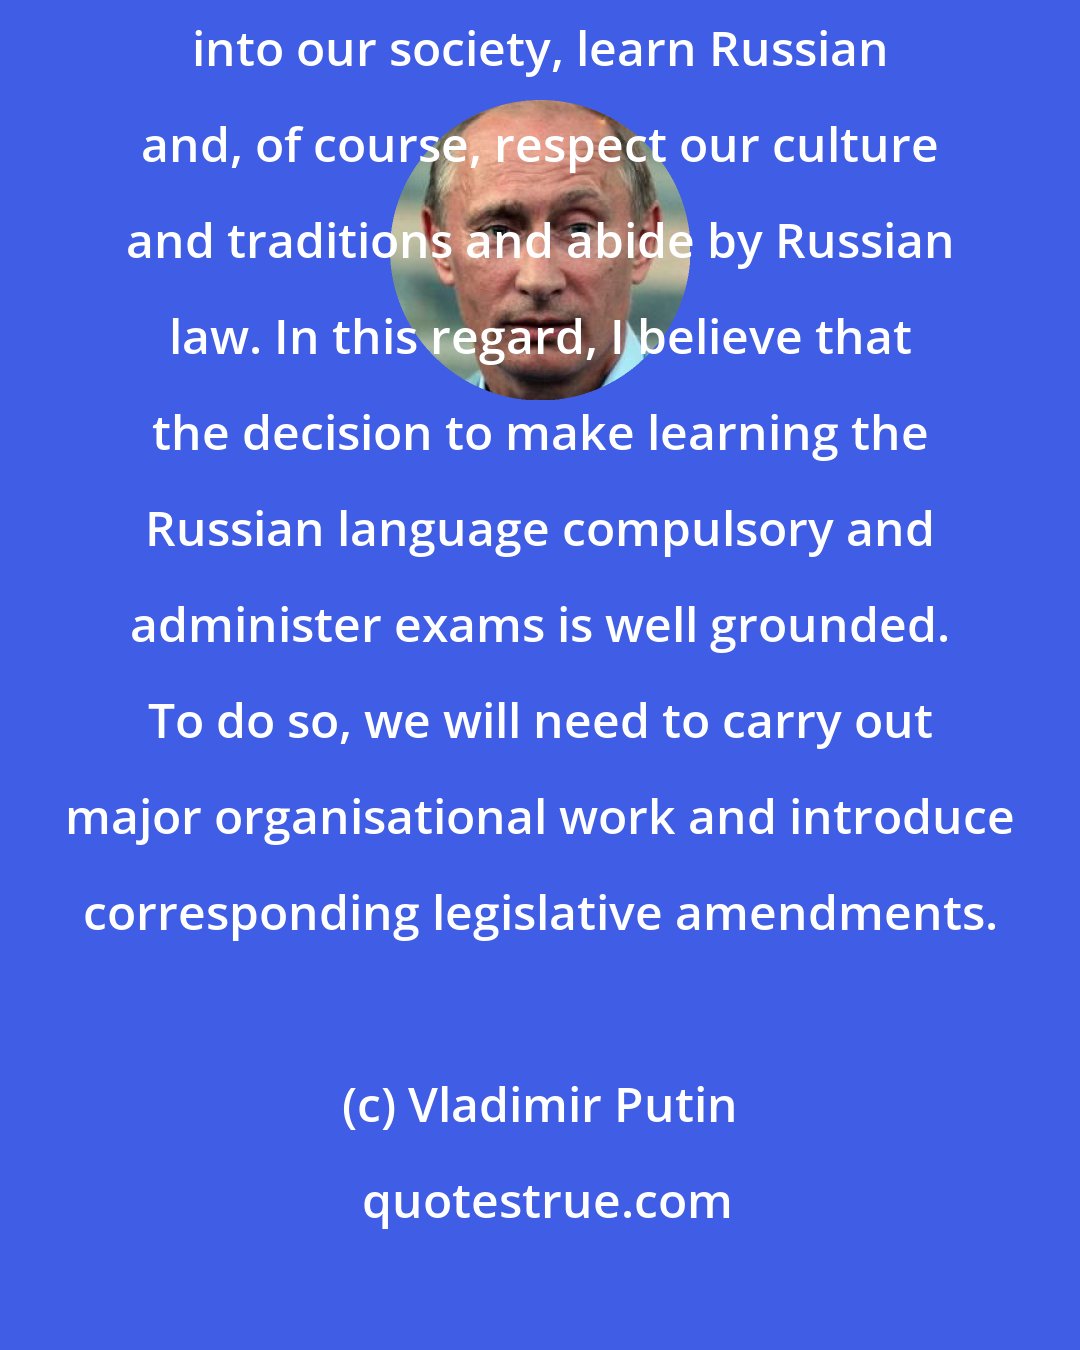 Vladimir Putin: We must create the conditions for immigrants to normally integrate into our society, learn Russian and, of course, respect our culture and traditions and abide by Russian law. In this regard, I believe that the decision to make learning the Russian language compulsory and administer exams is well grounded. To do so, we will need to carry out major organisational work and introduce corresponding legislative amendments.